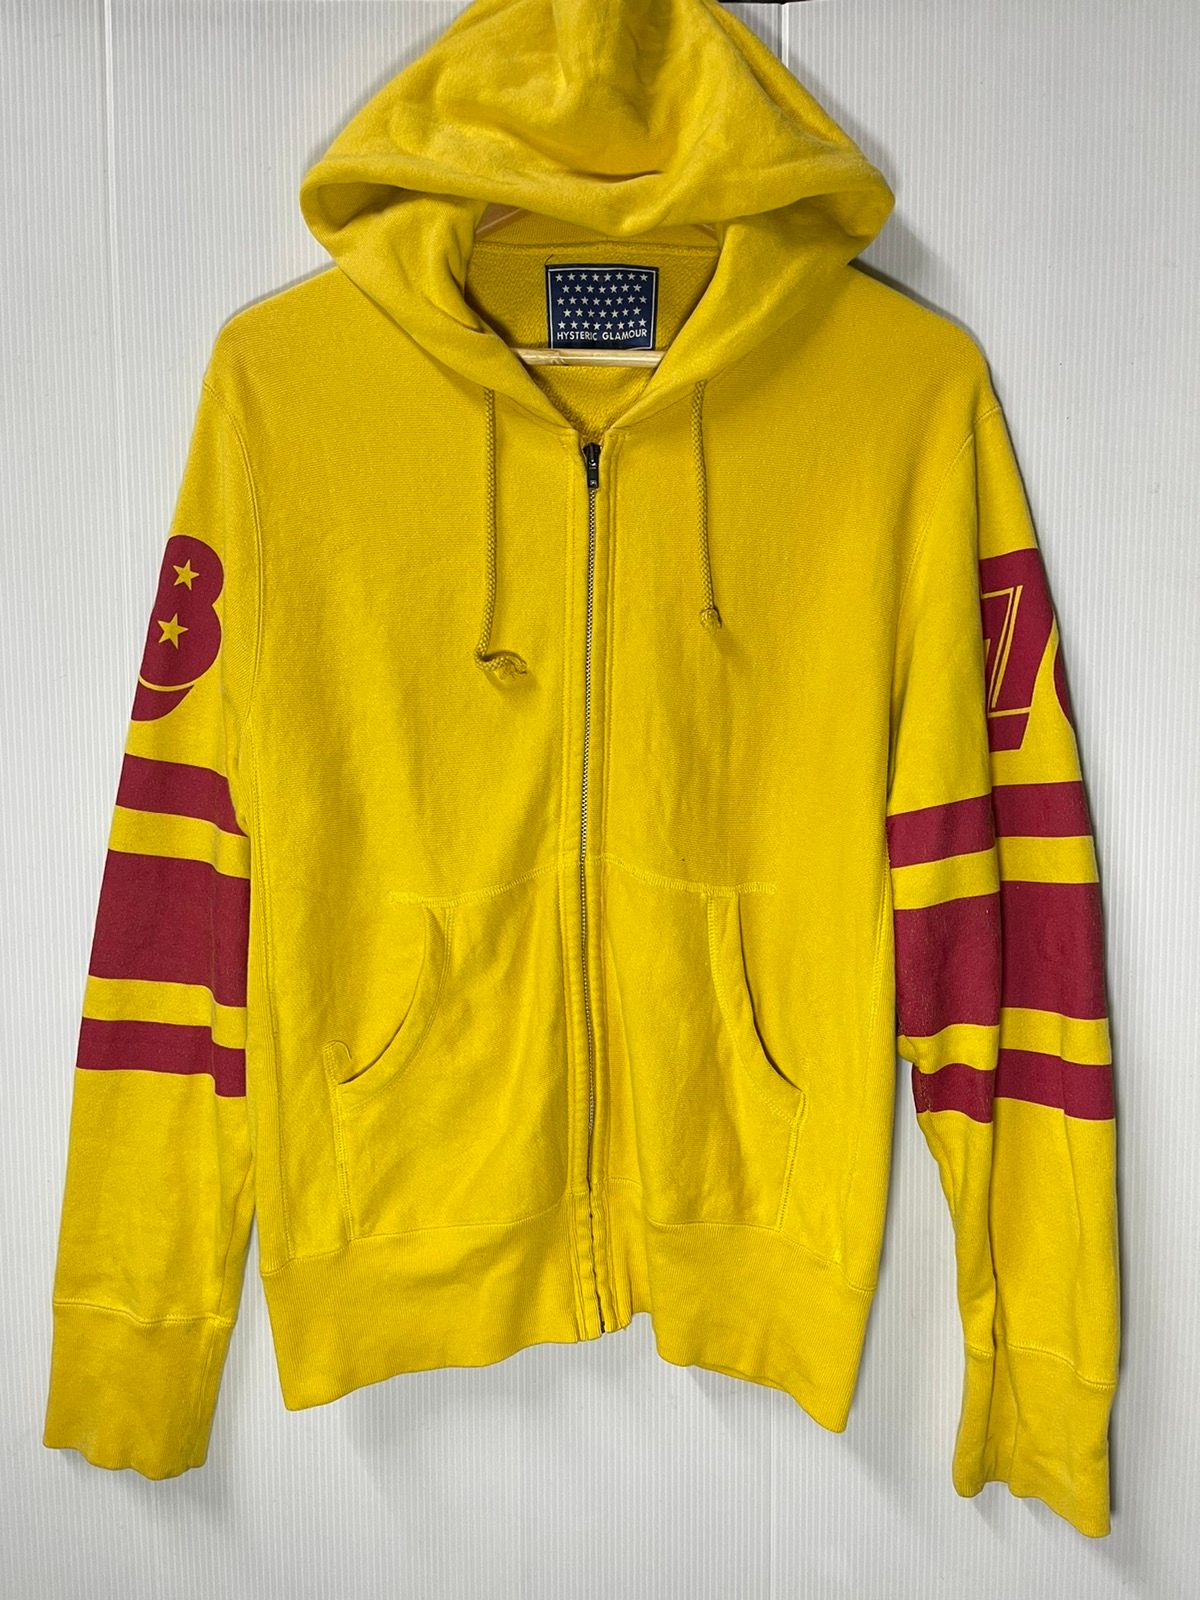 Pre-owned Hysteric Glamour Vintage  Hoodie Nice Design In Yellow